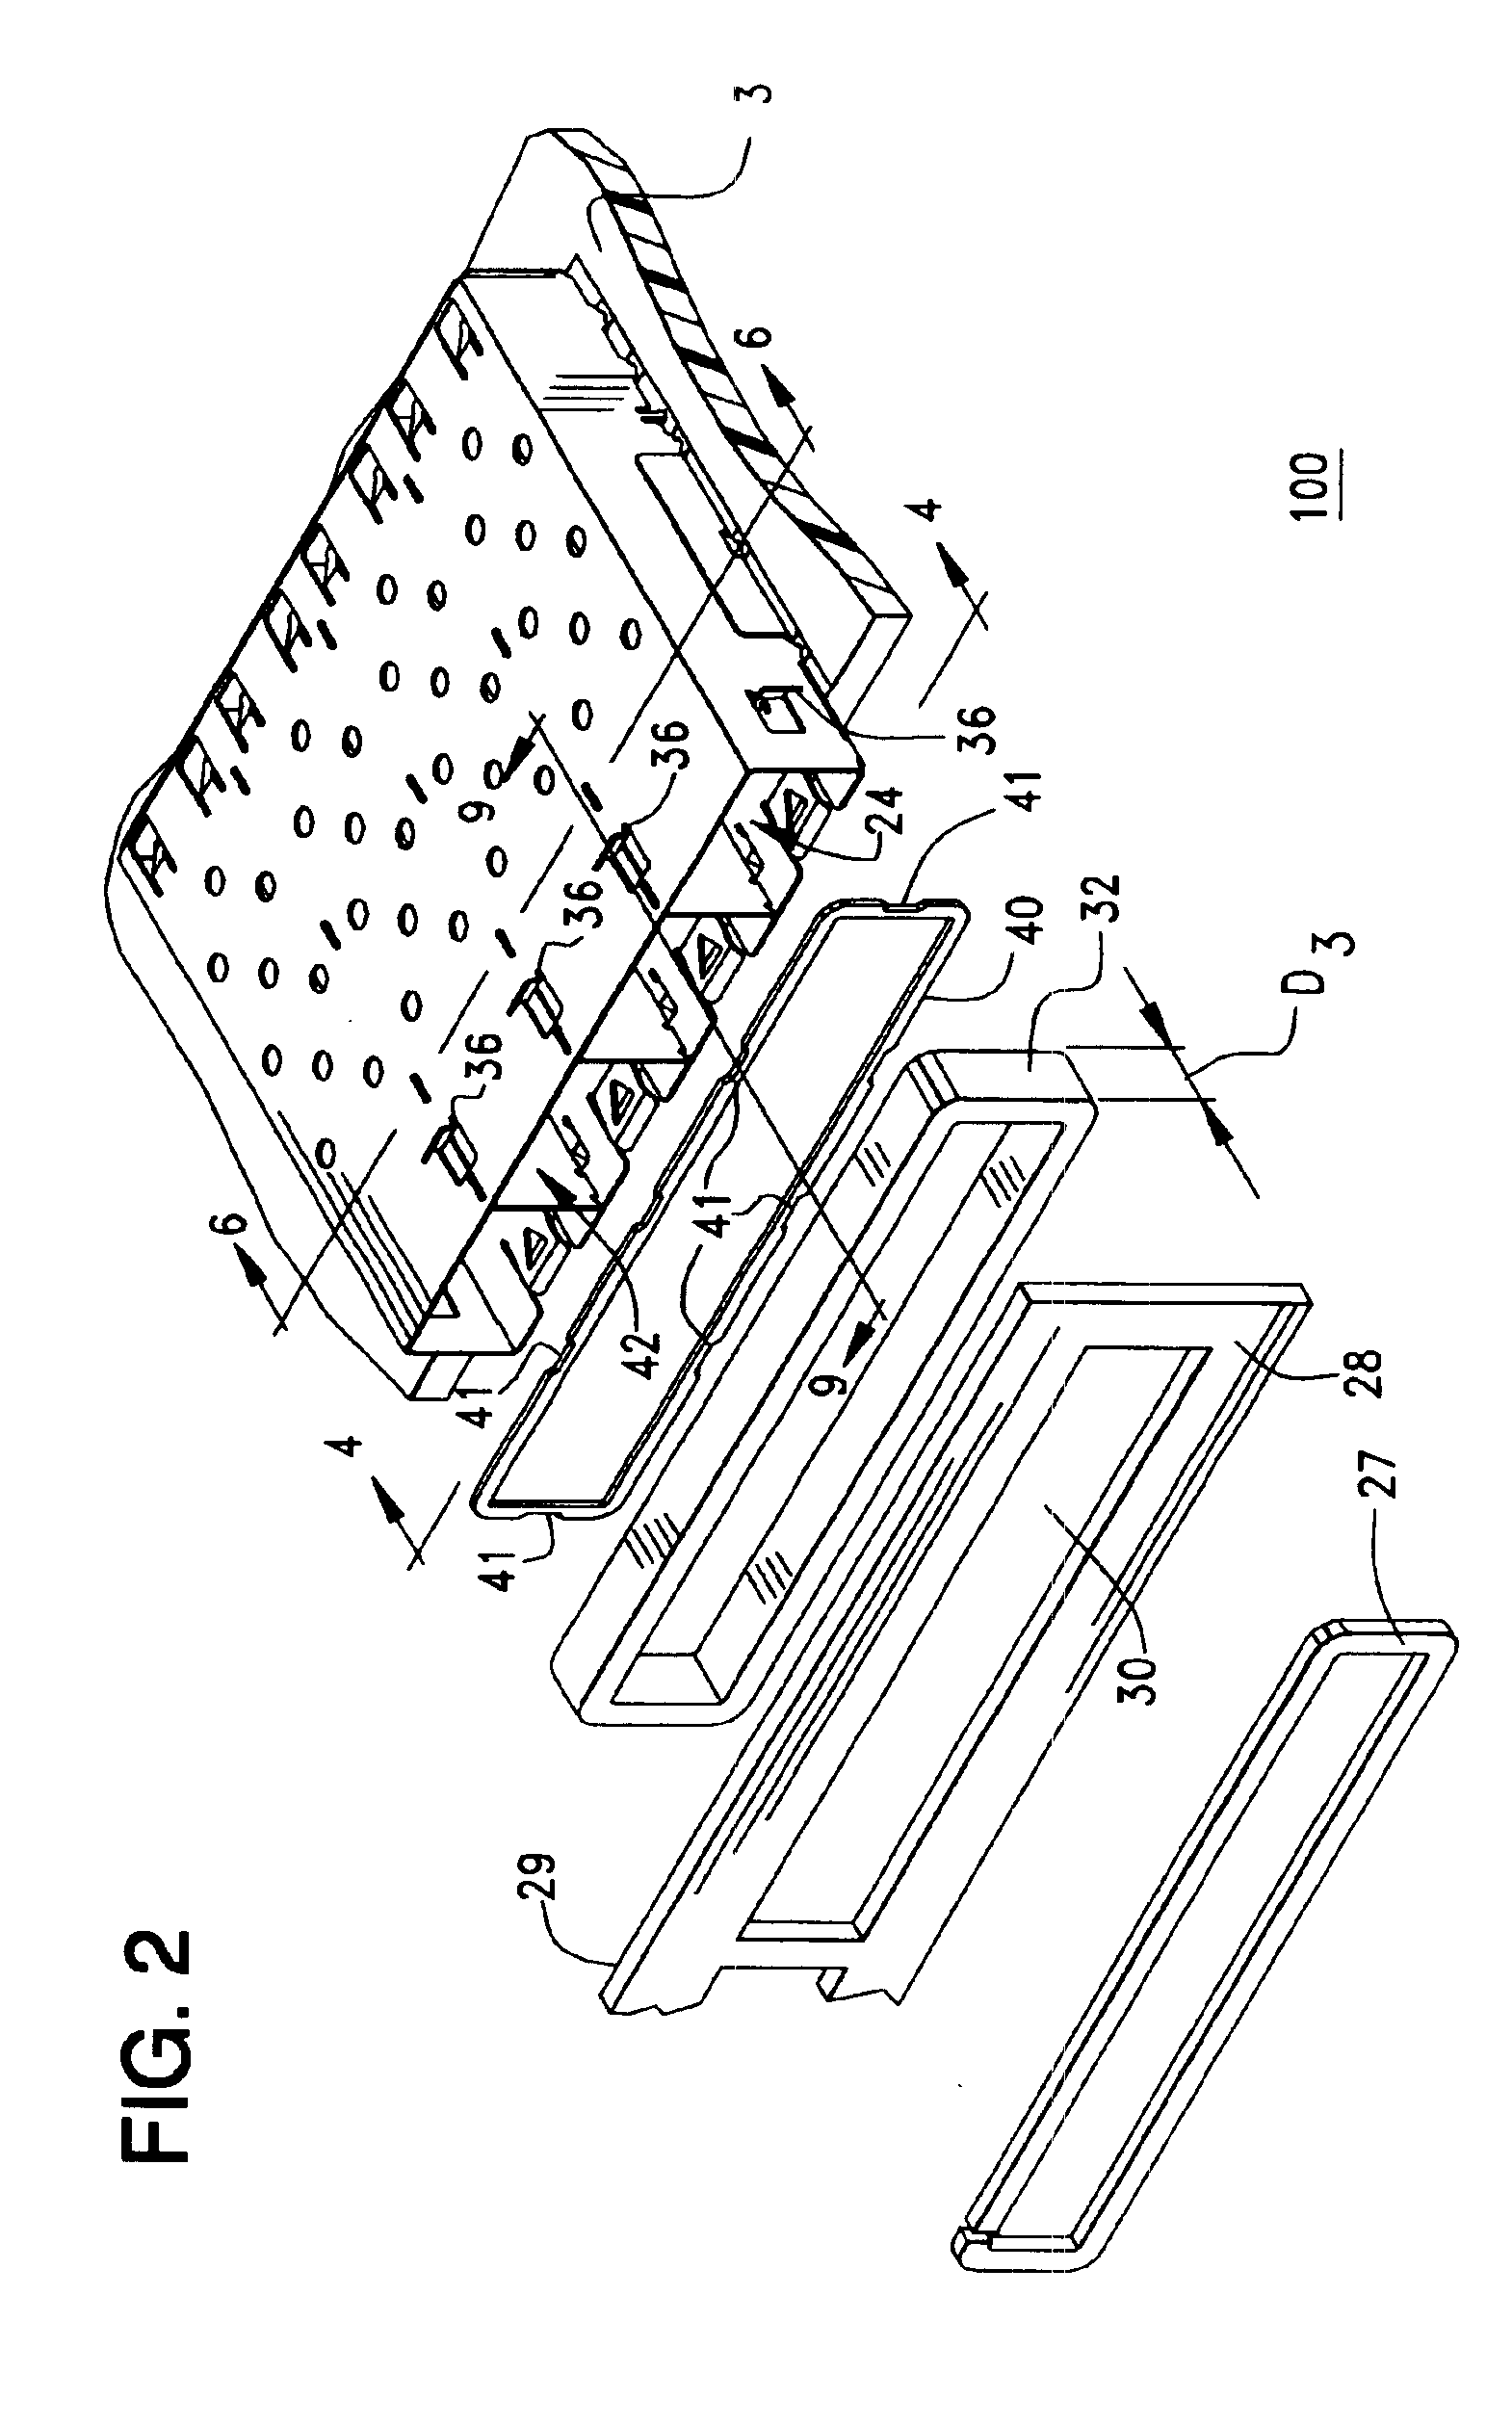 Shielding cage with improved EMI shielding gasket construction